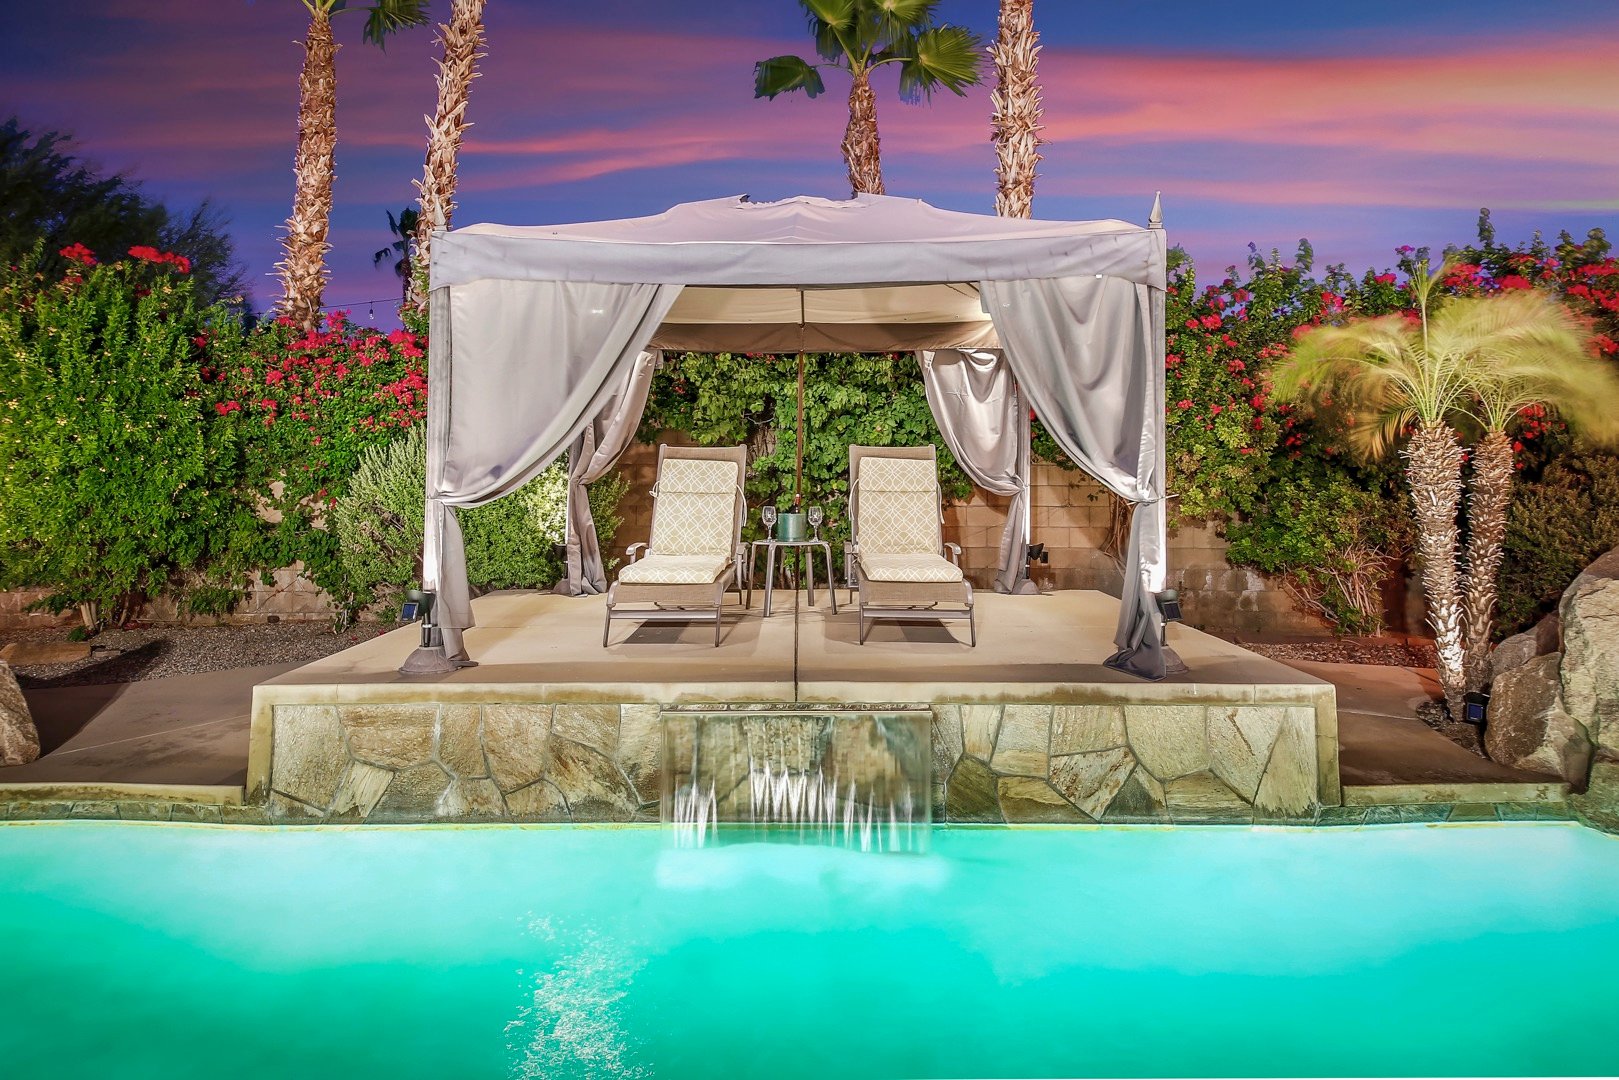 The cabana in the upper landing patio is sure to impress and keep you cool with extra shade.